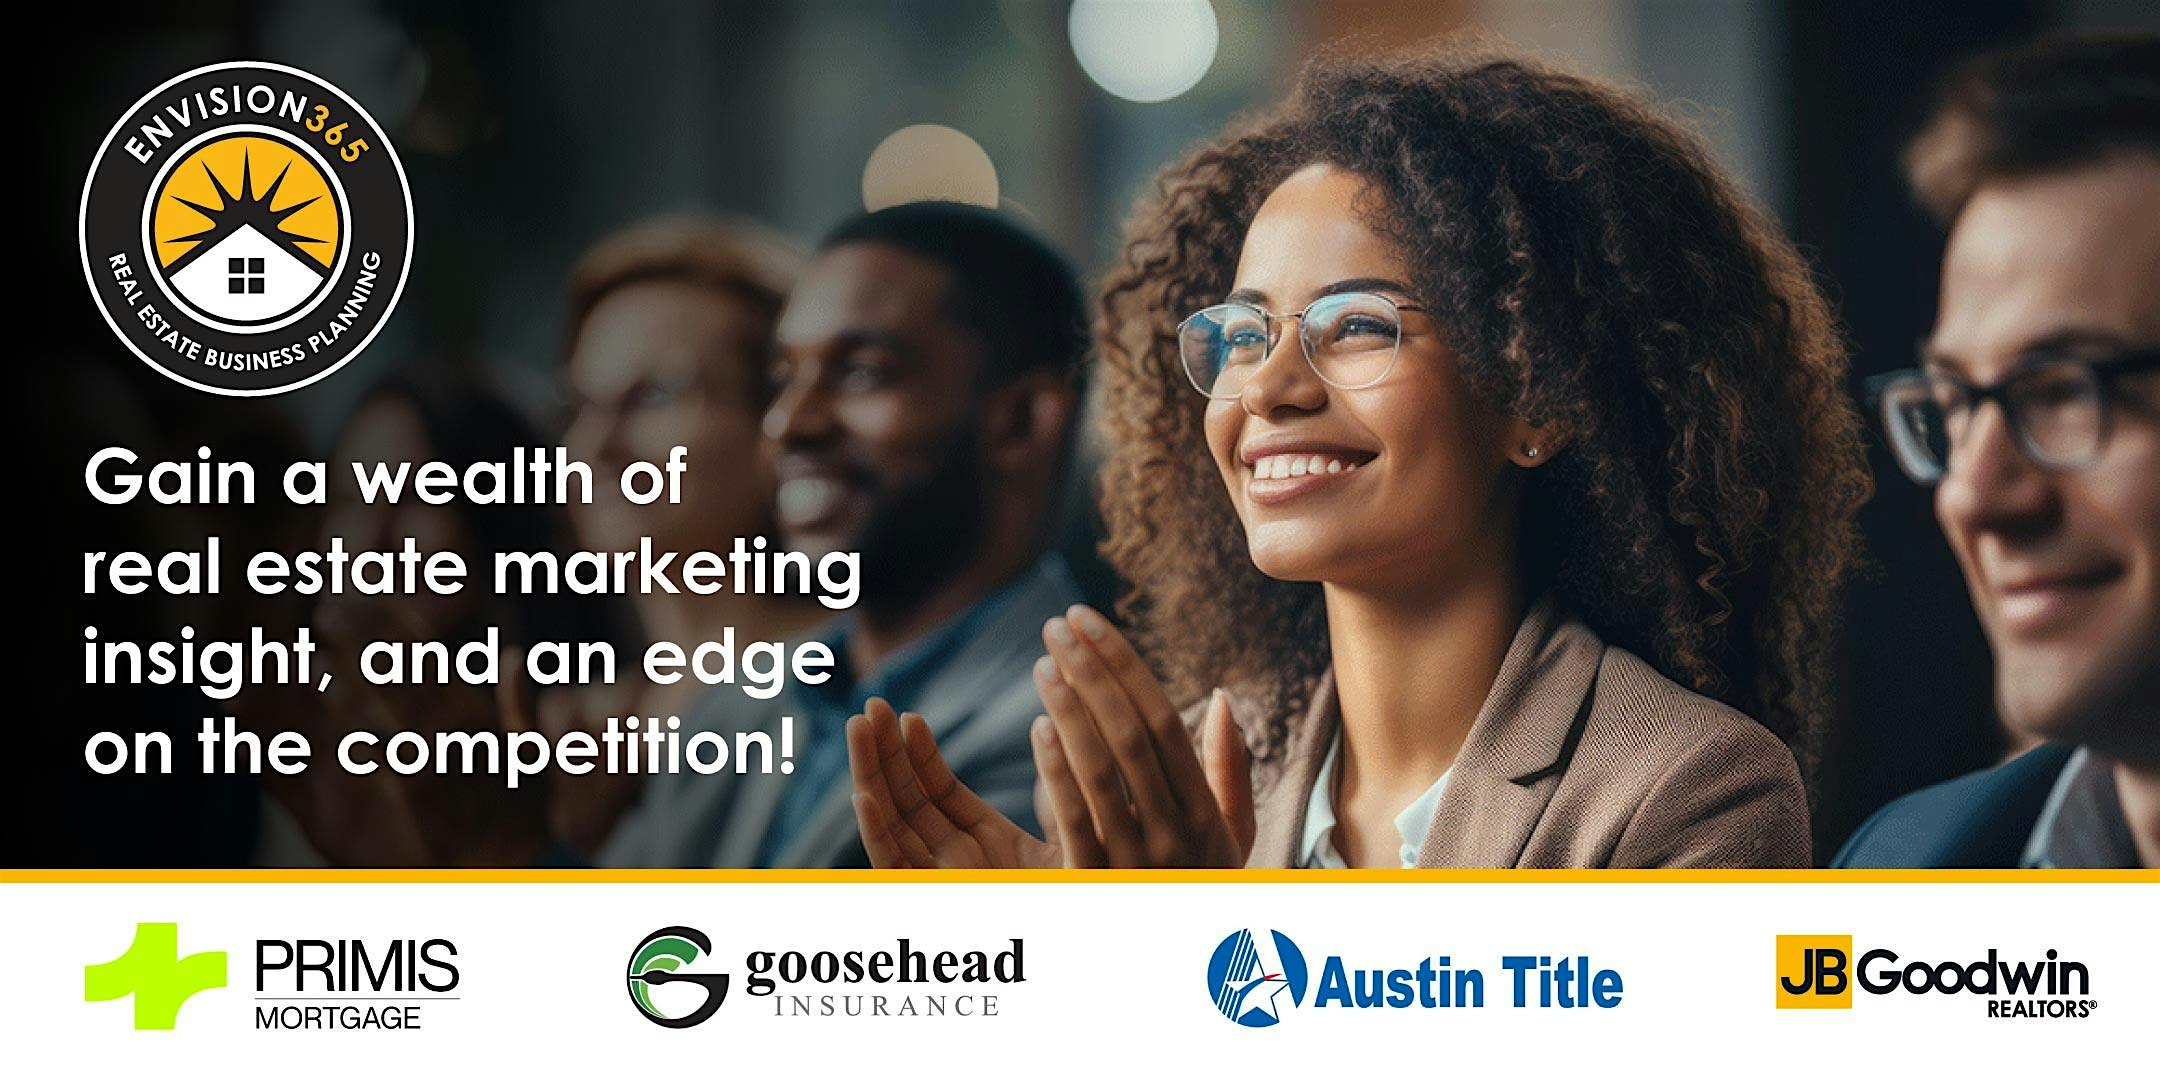 Envision365 Real Estate Marketing Mastery Event - Austin